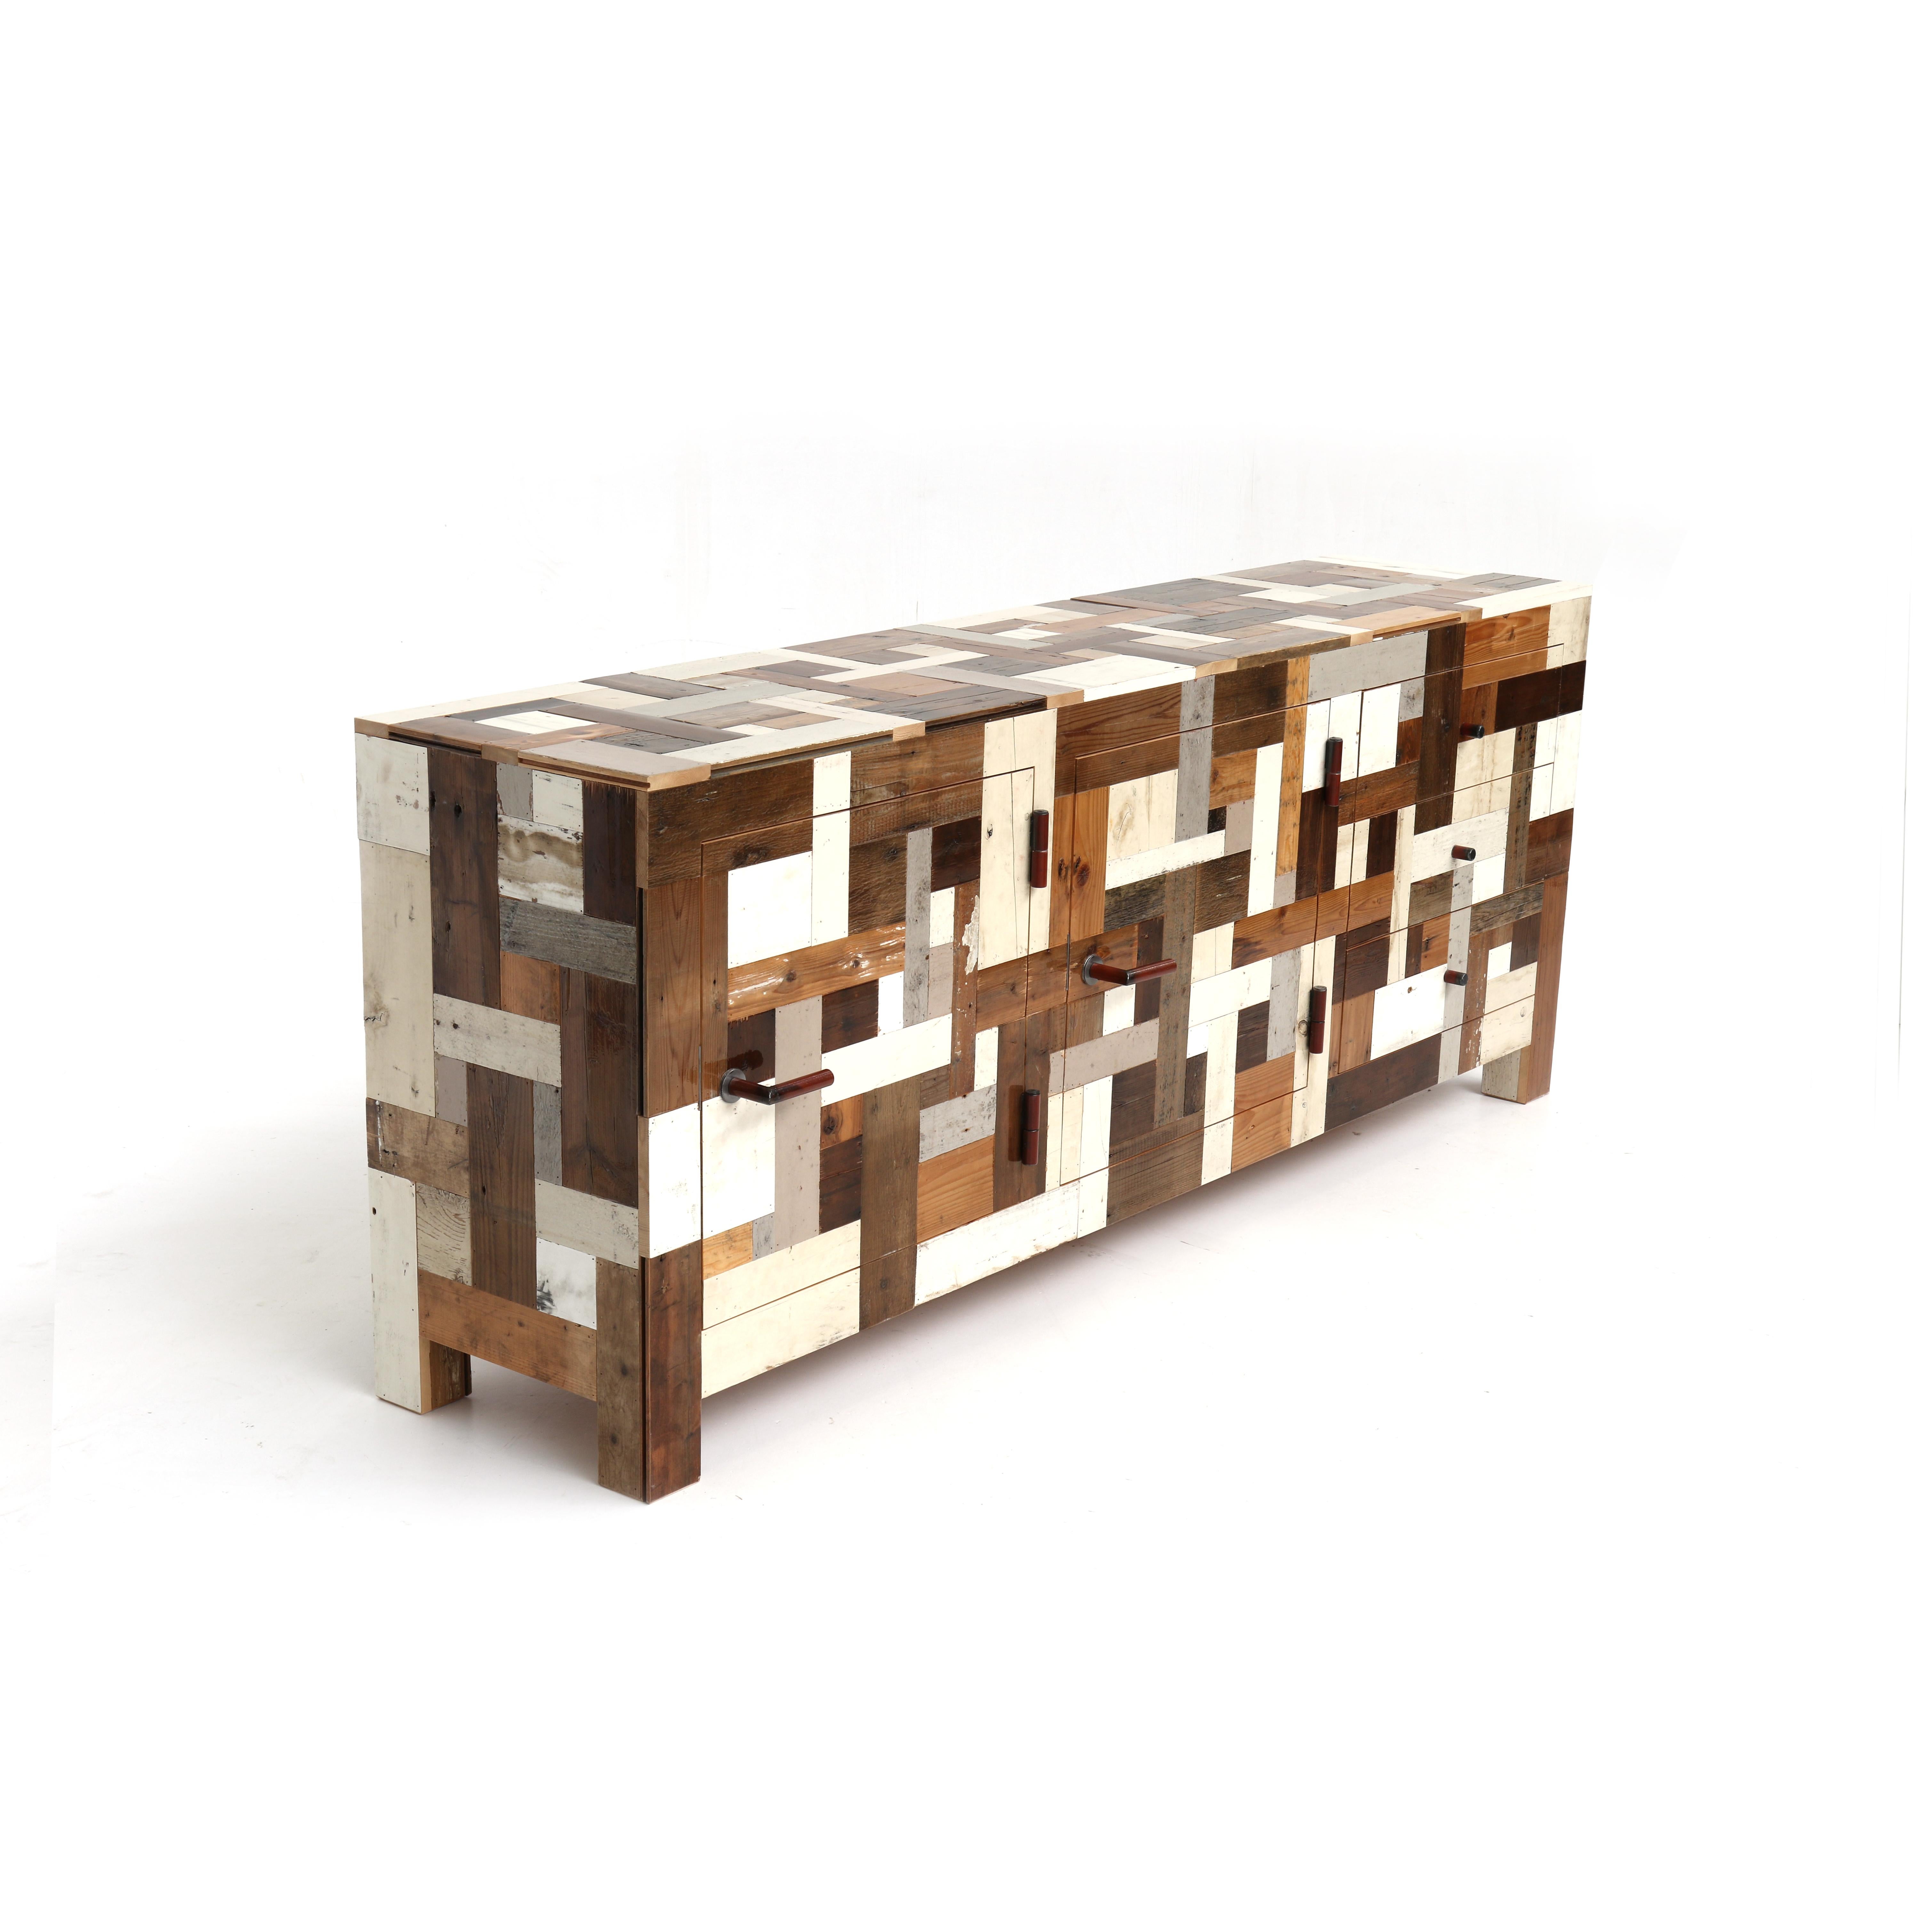 Contemporary Modern Wooden Credenza 3 Drawers, Waste Cabinet in Scrapwood by Piet Hein Eek For Sale